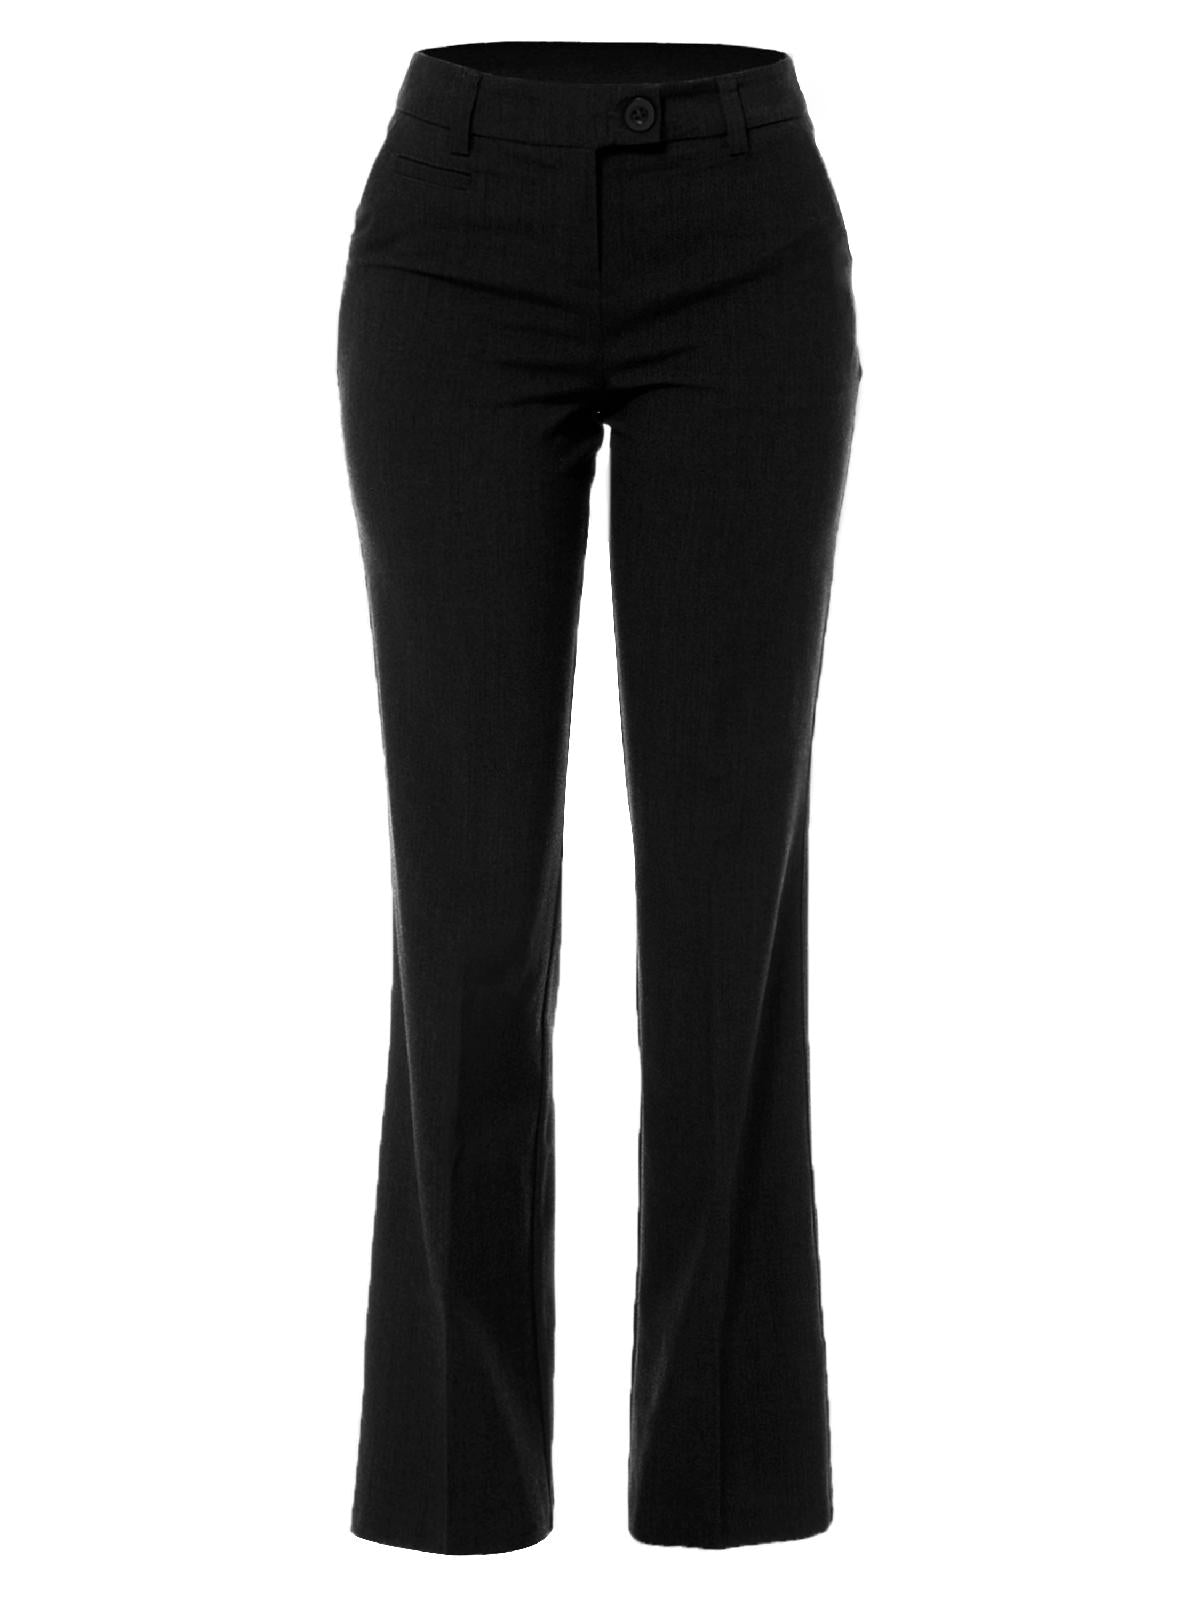 Solid Regular Rise Boot-Cut Stretch Office Slacks with Back and Side Pockets